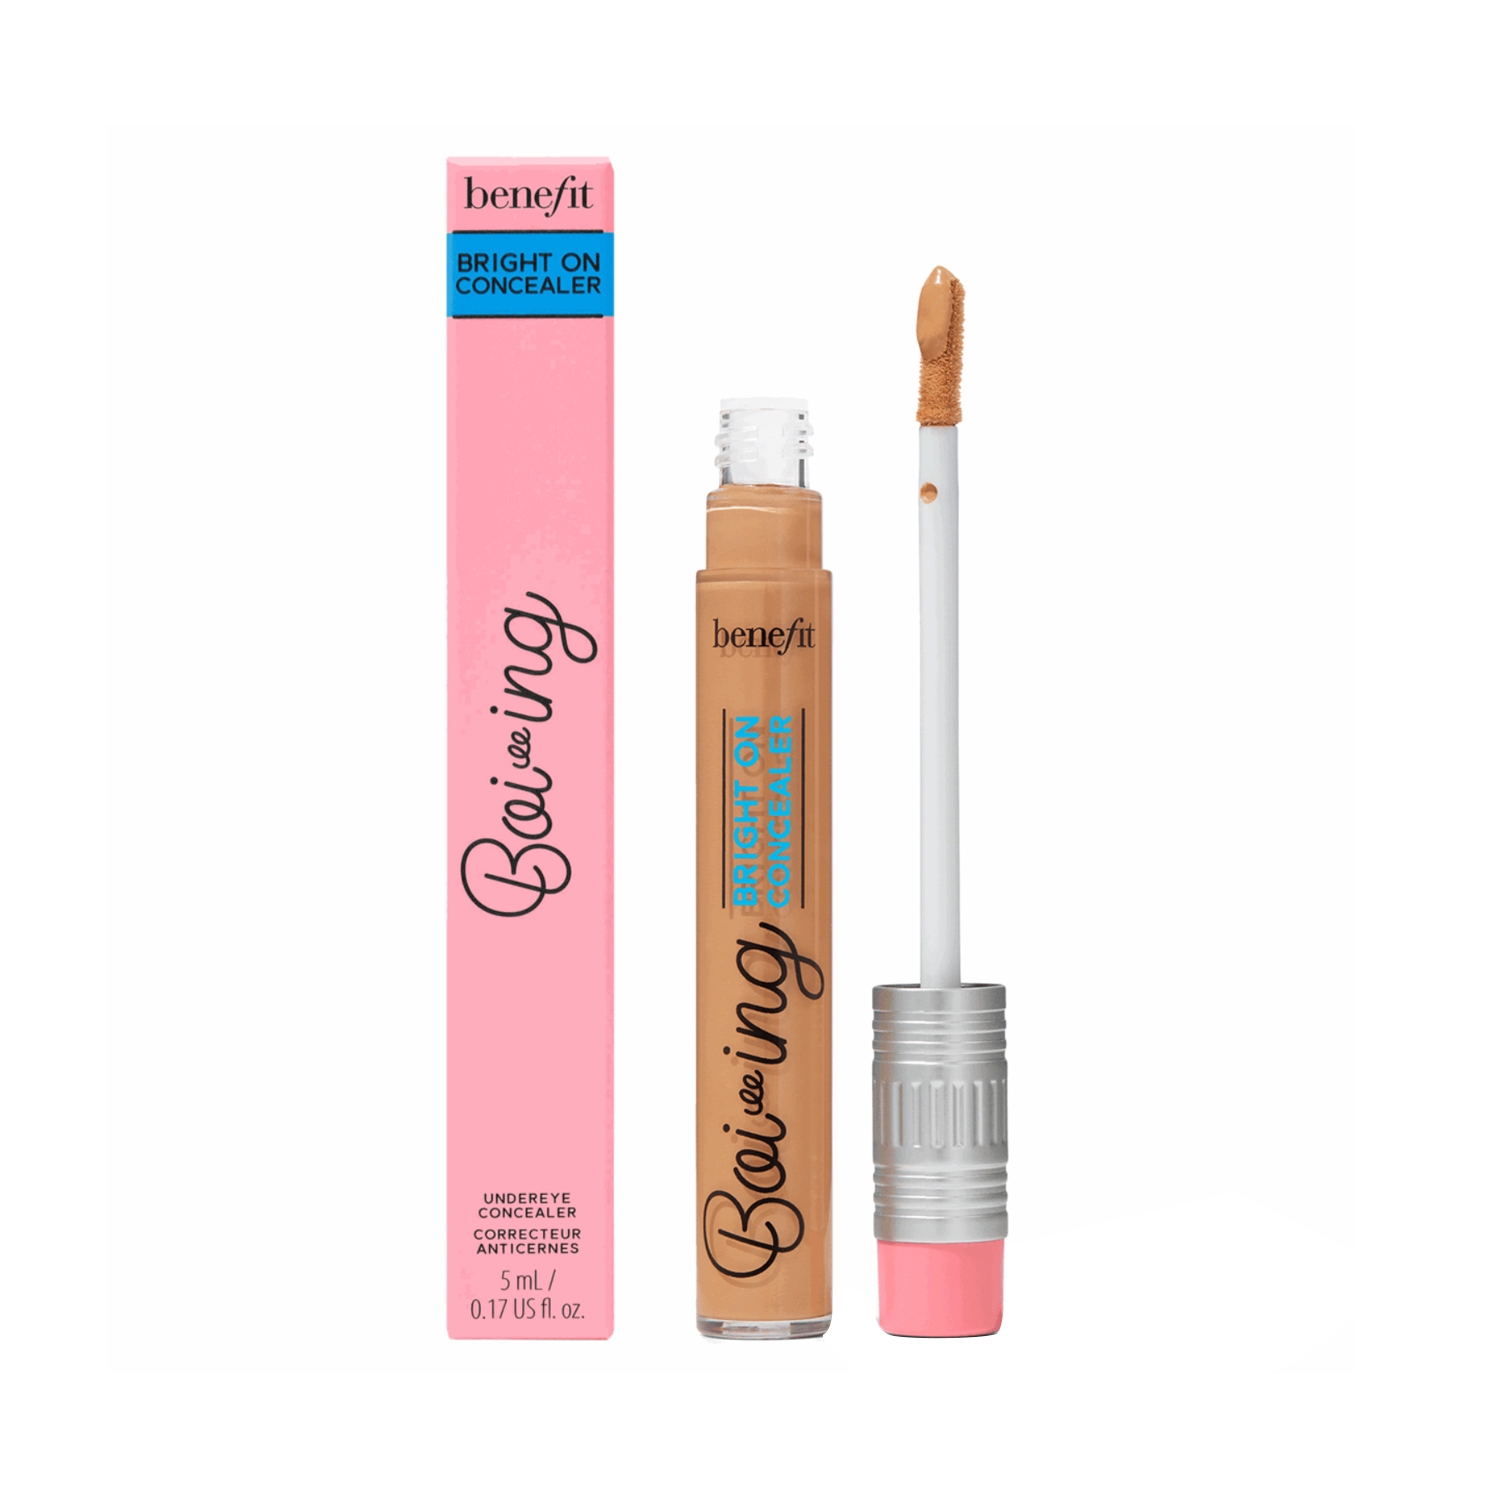 Benefit Cosmetics | Benefit Cosmetics Boi-ing Bright On Concealer - Apricot (5ml)